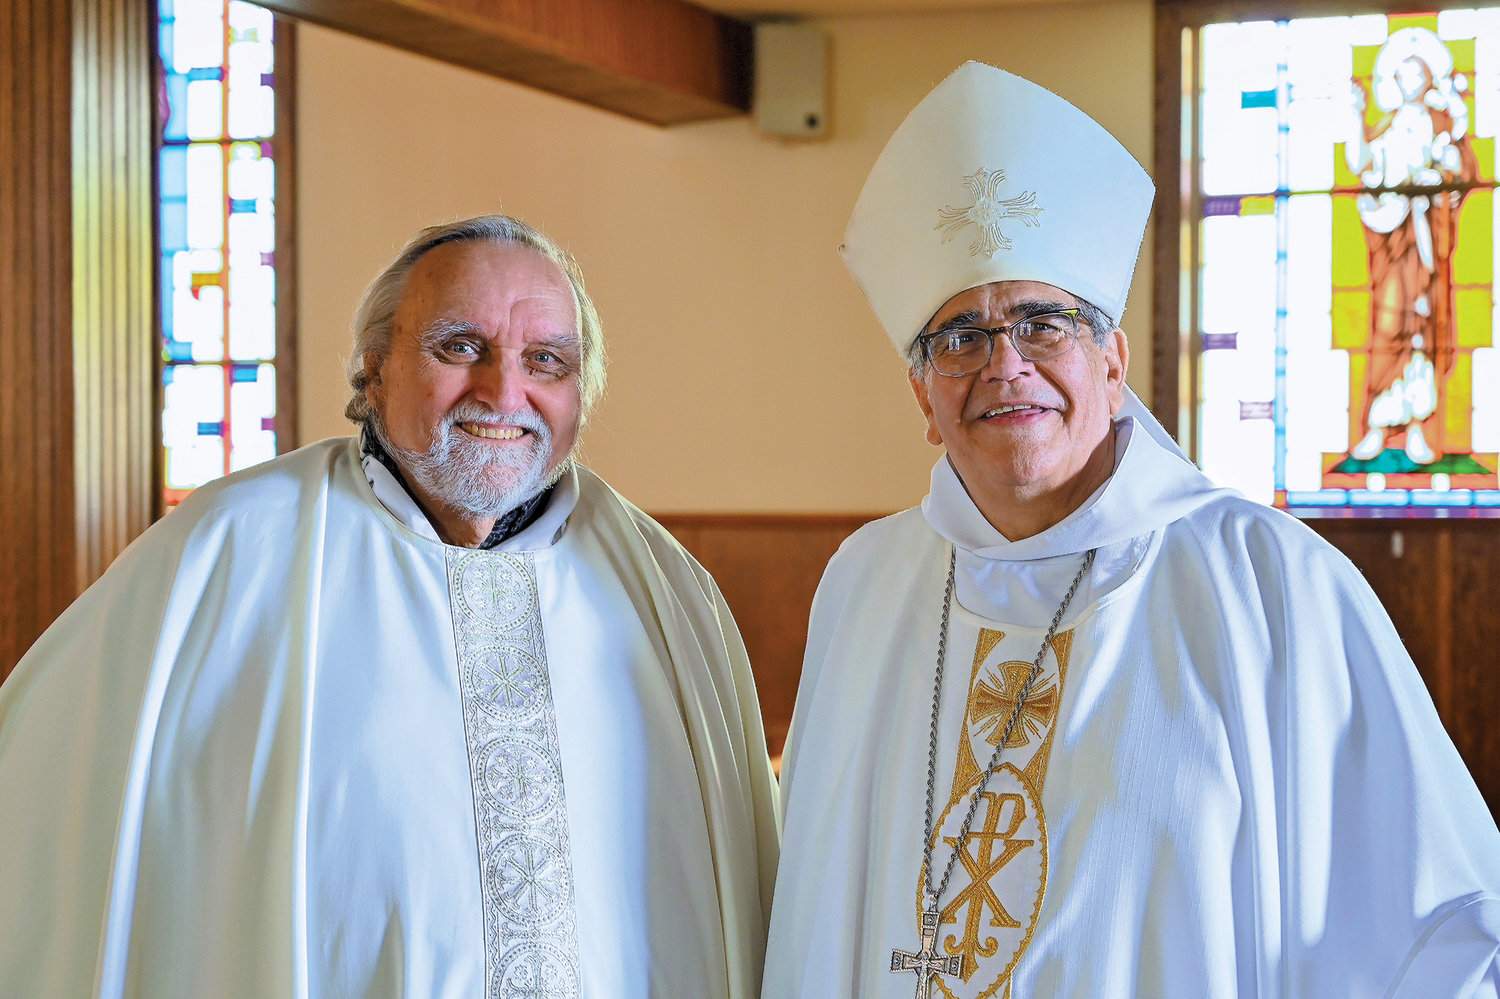 Father Bernard Heter, pastor of St. Joseph, left, and Bishop Lagonegro show their joy at the conclusion of the Mass.